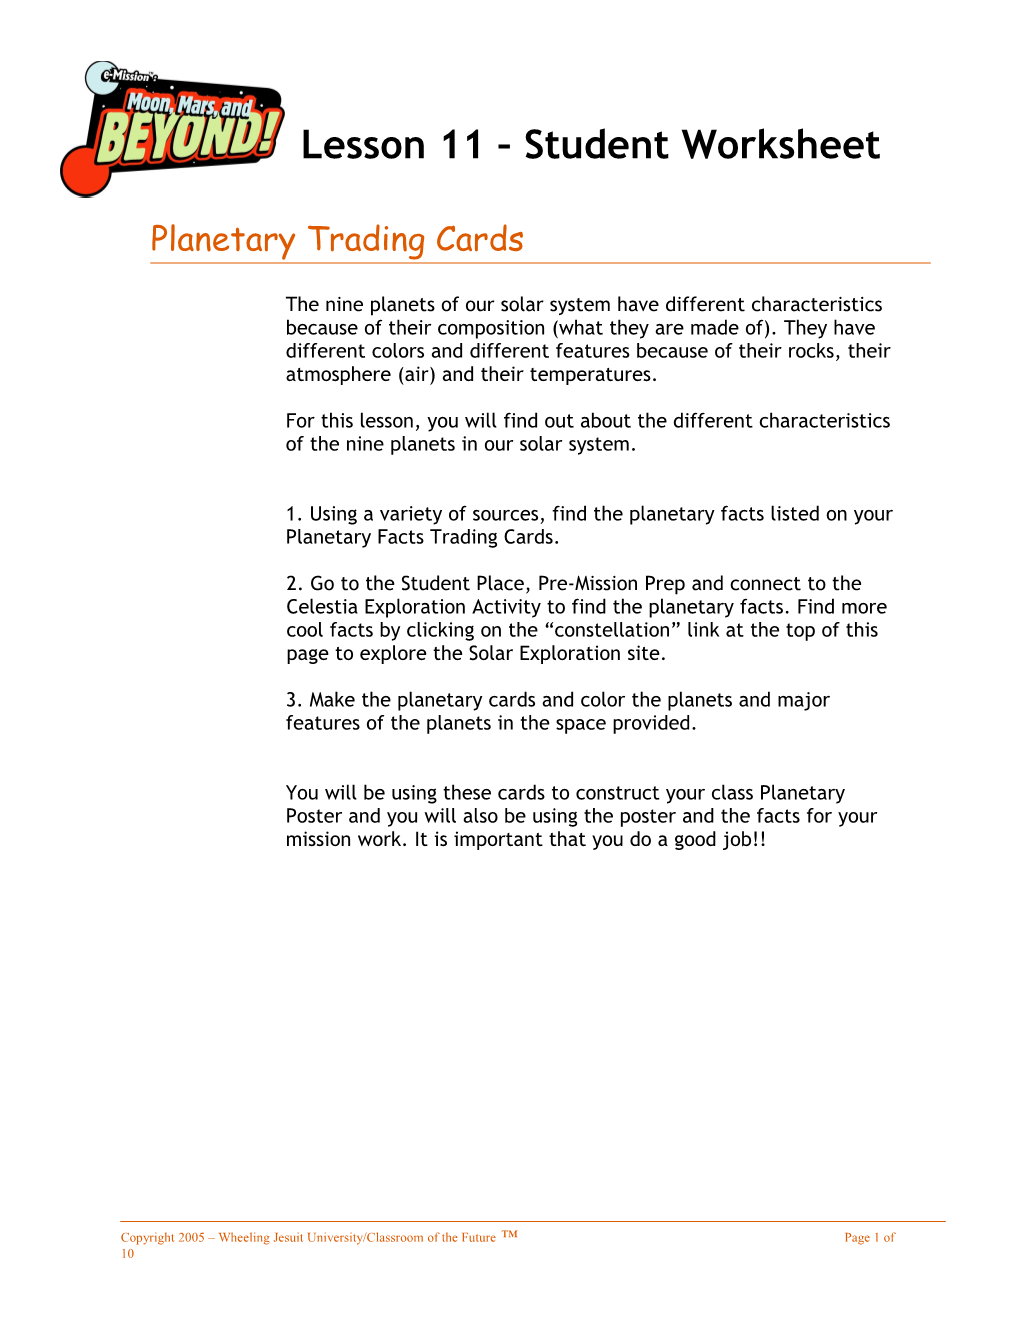 Planetary Trading Cards